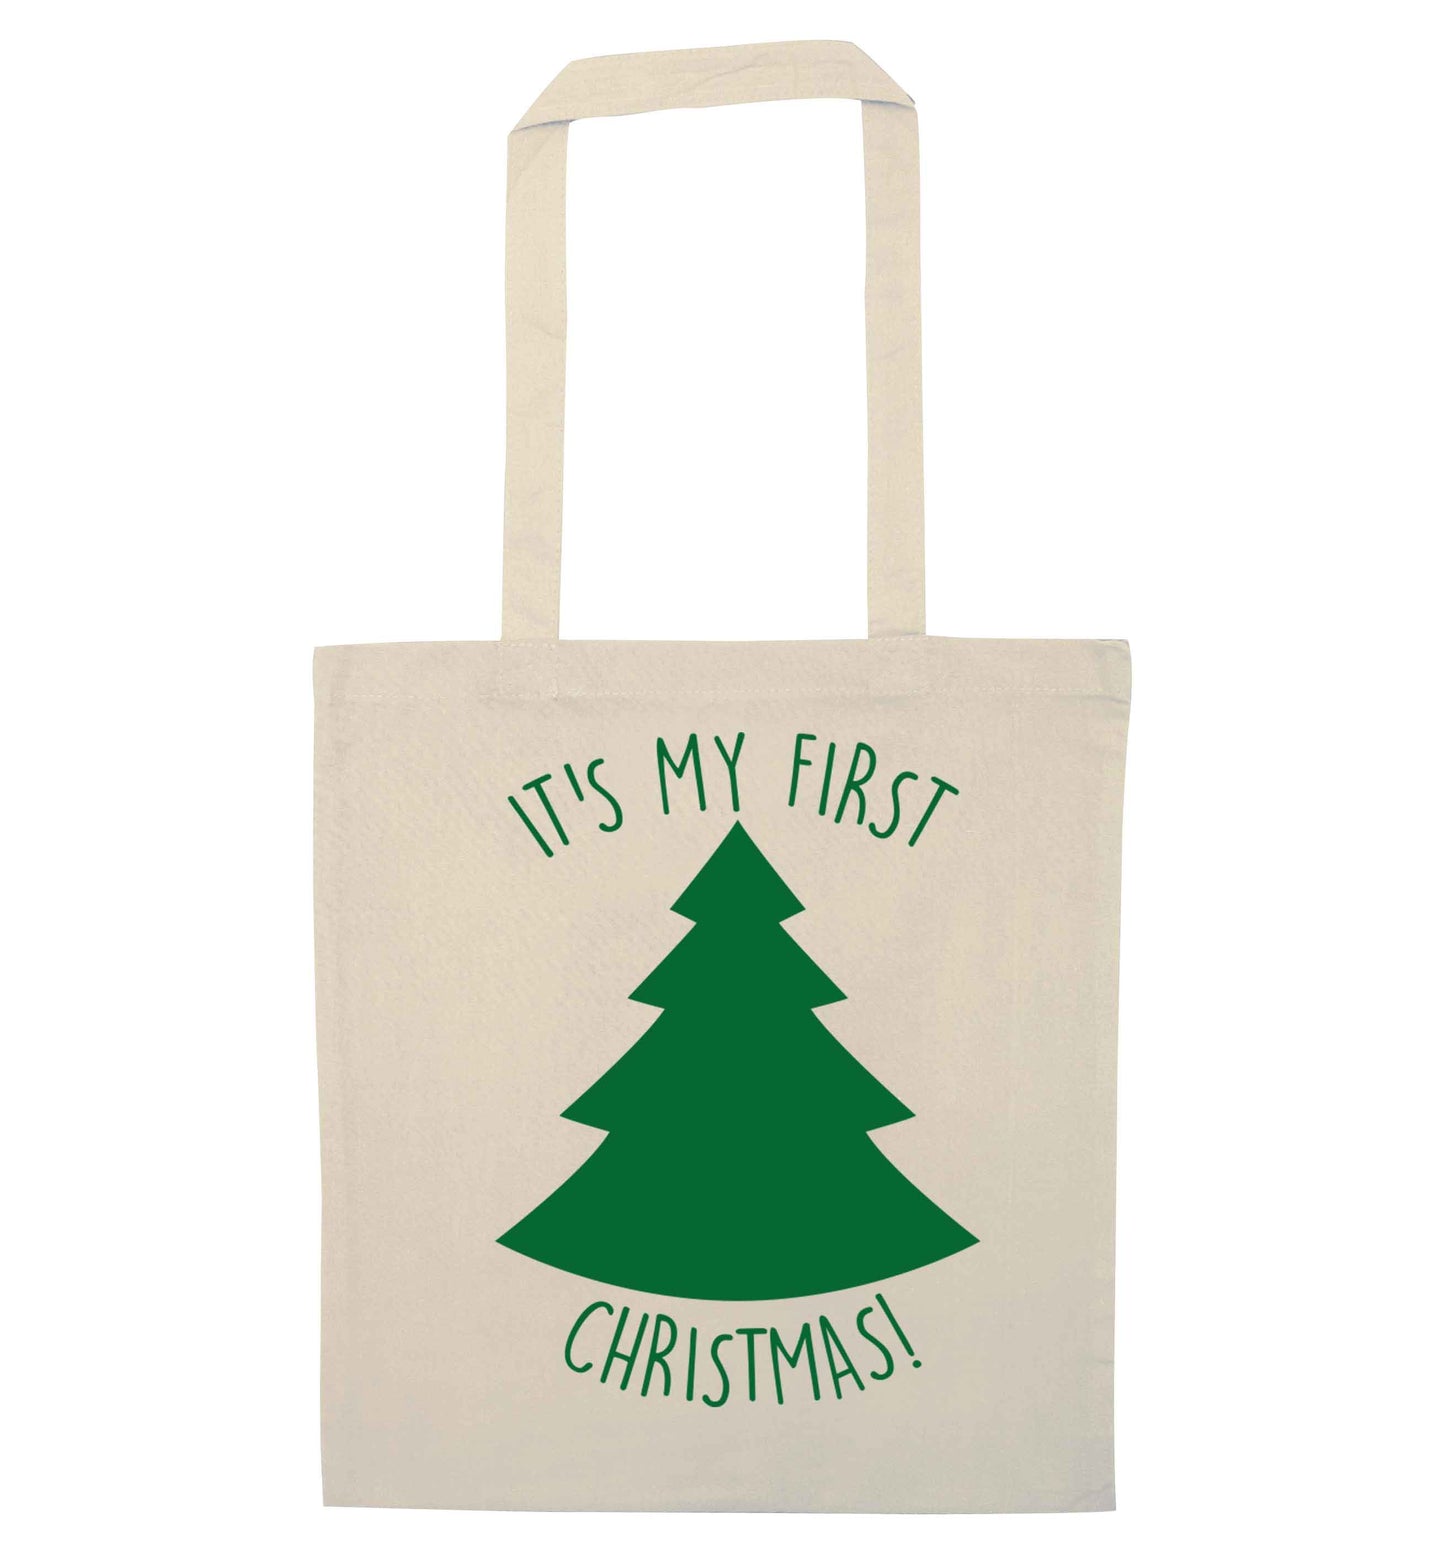 It's my first Christmas - tree natural tote bag